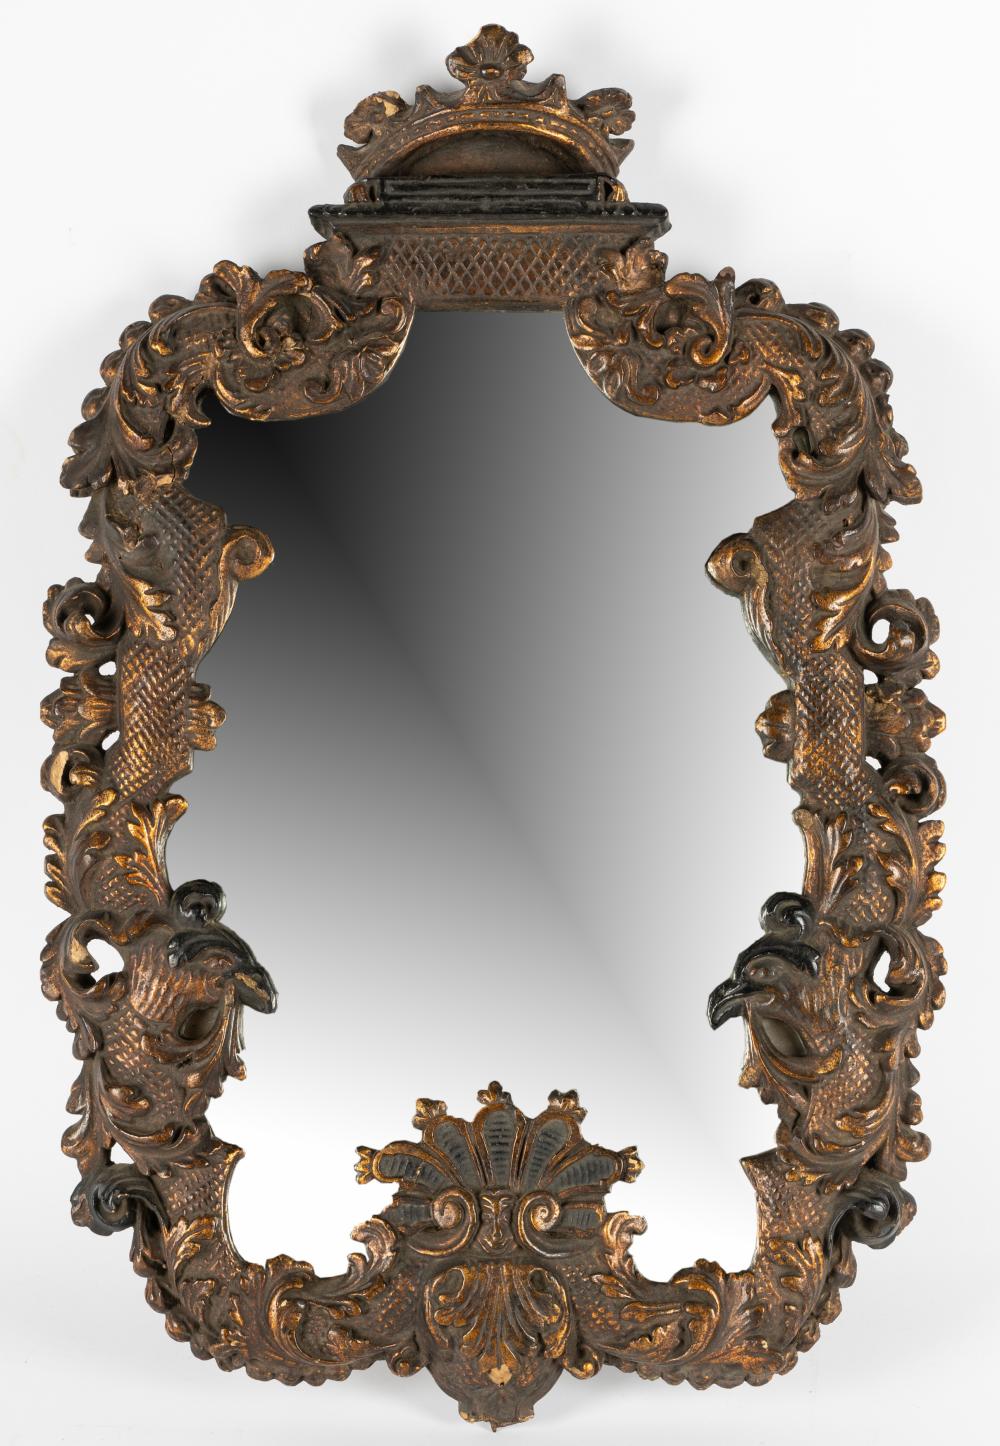 ROCOCO-STYLE CARVED GILTWOOD WALL